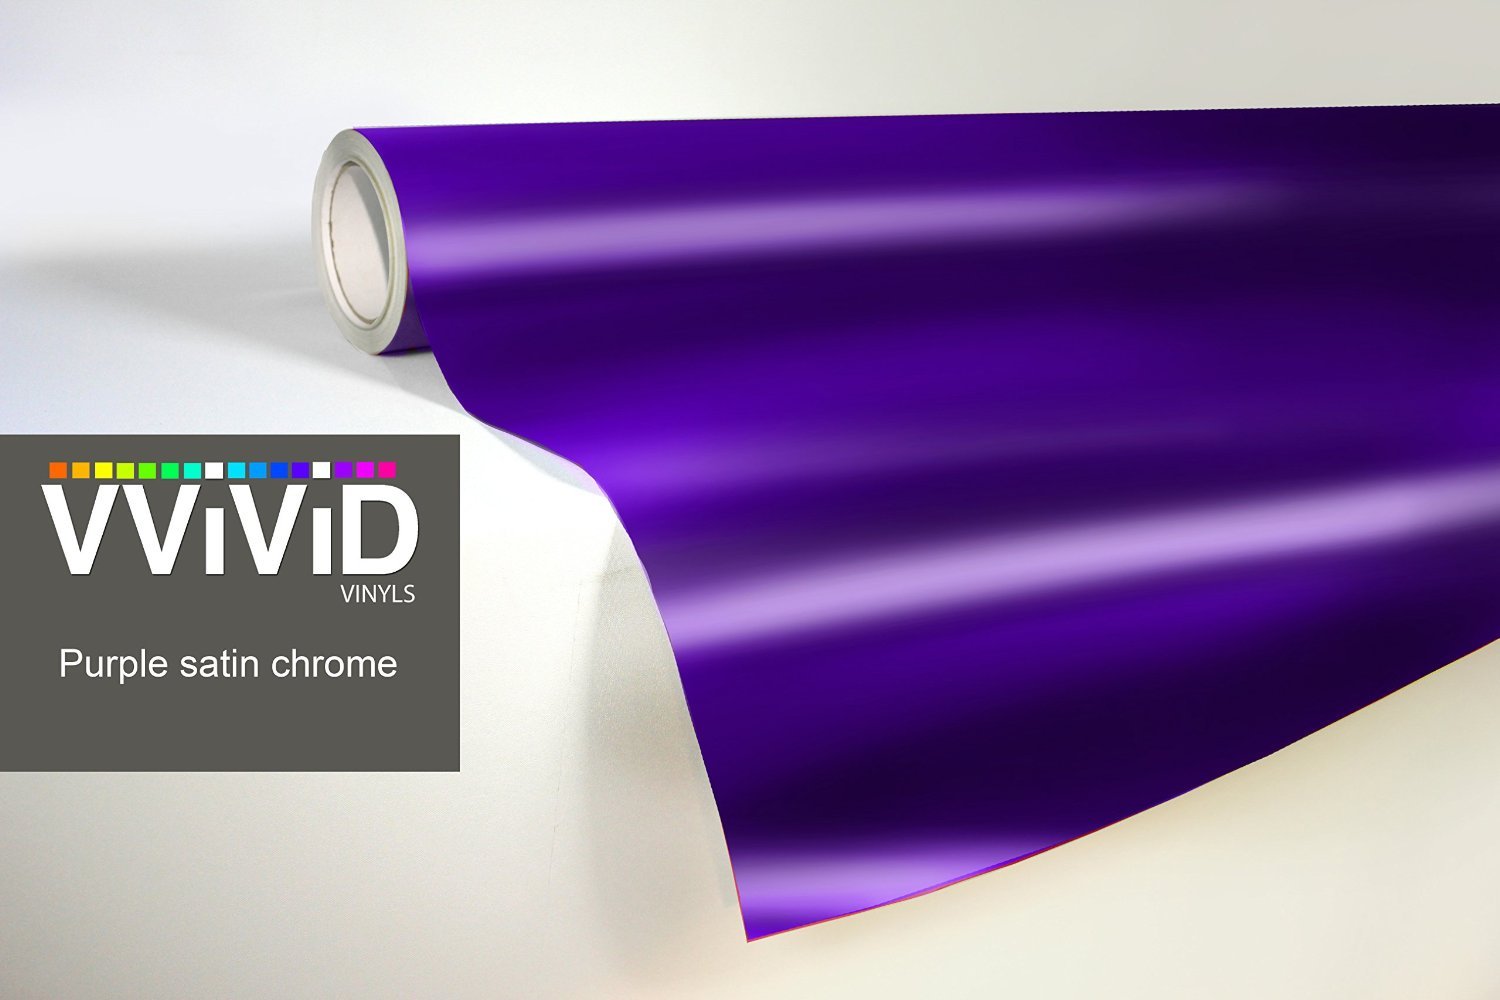 Purple Satin Chrome Conformable Stretch Vinyl Wrap Roll with VViViD XPO Air Release Technology - 3ft x 5ft